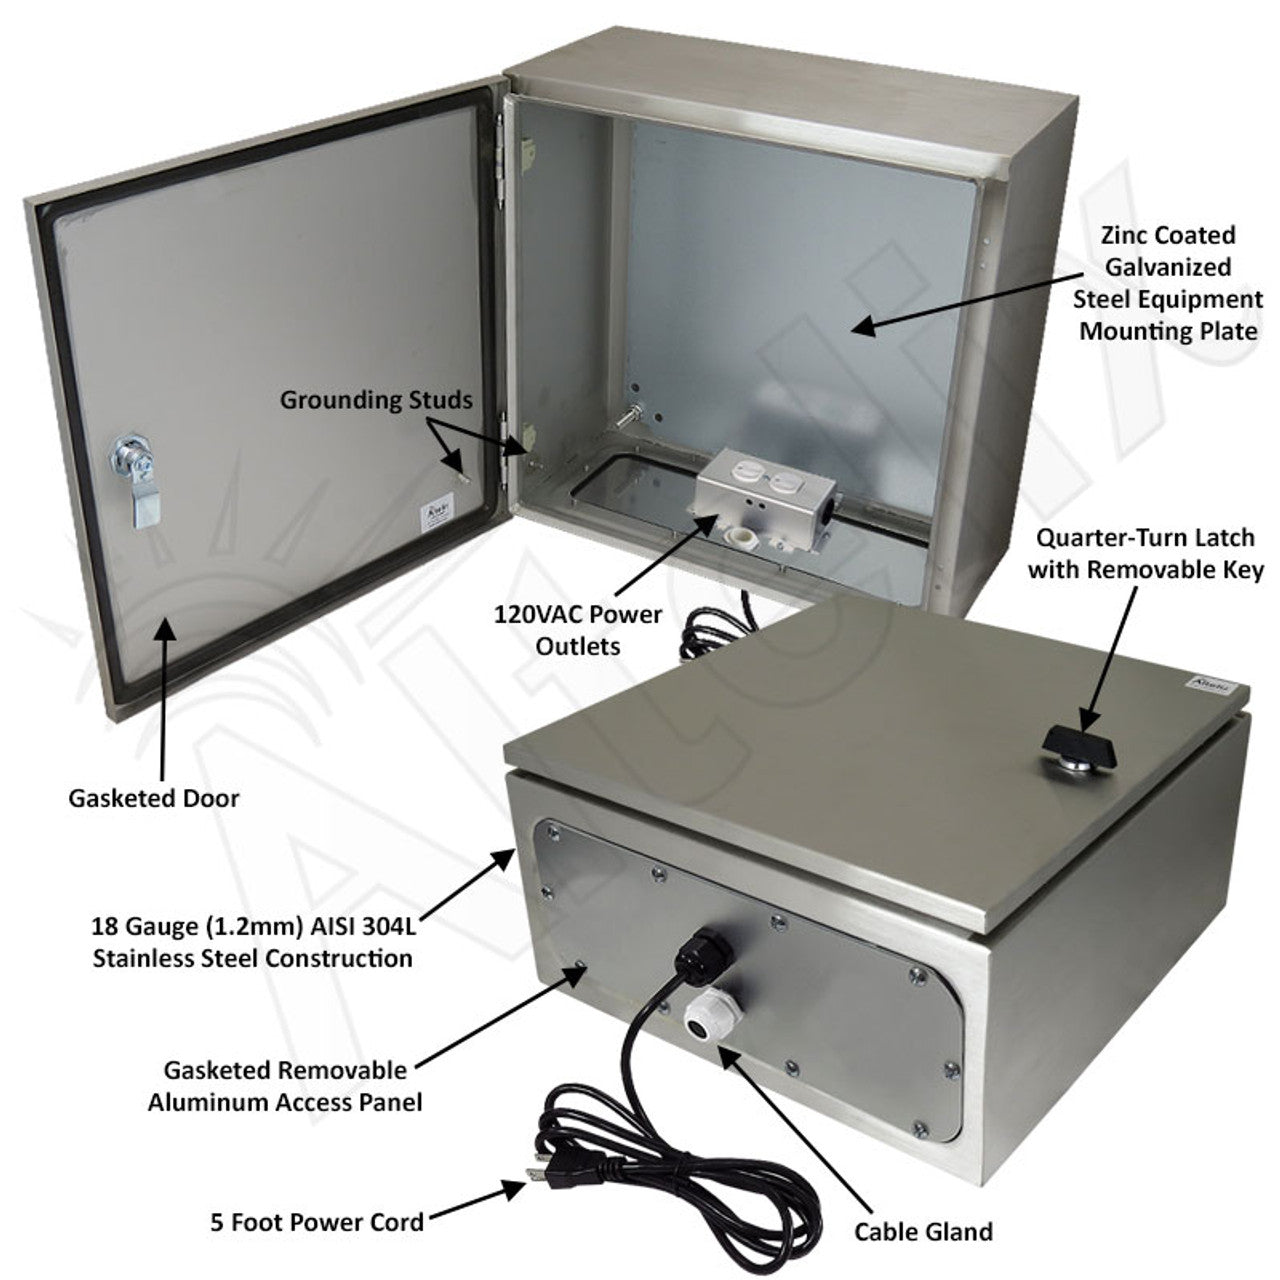 Altelix NEMA 4X Stainless Steel Weatherproof Enclosure with 120 VAC Outlets and Power Cord